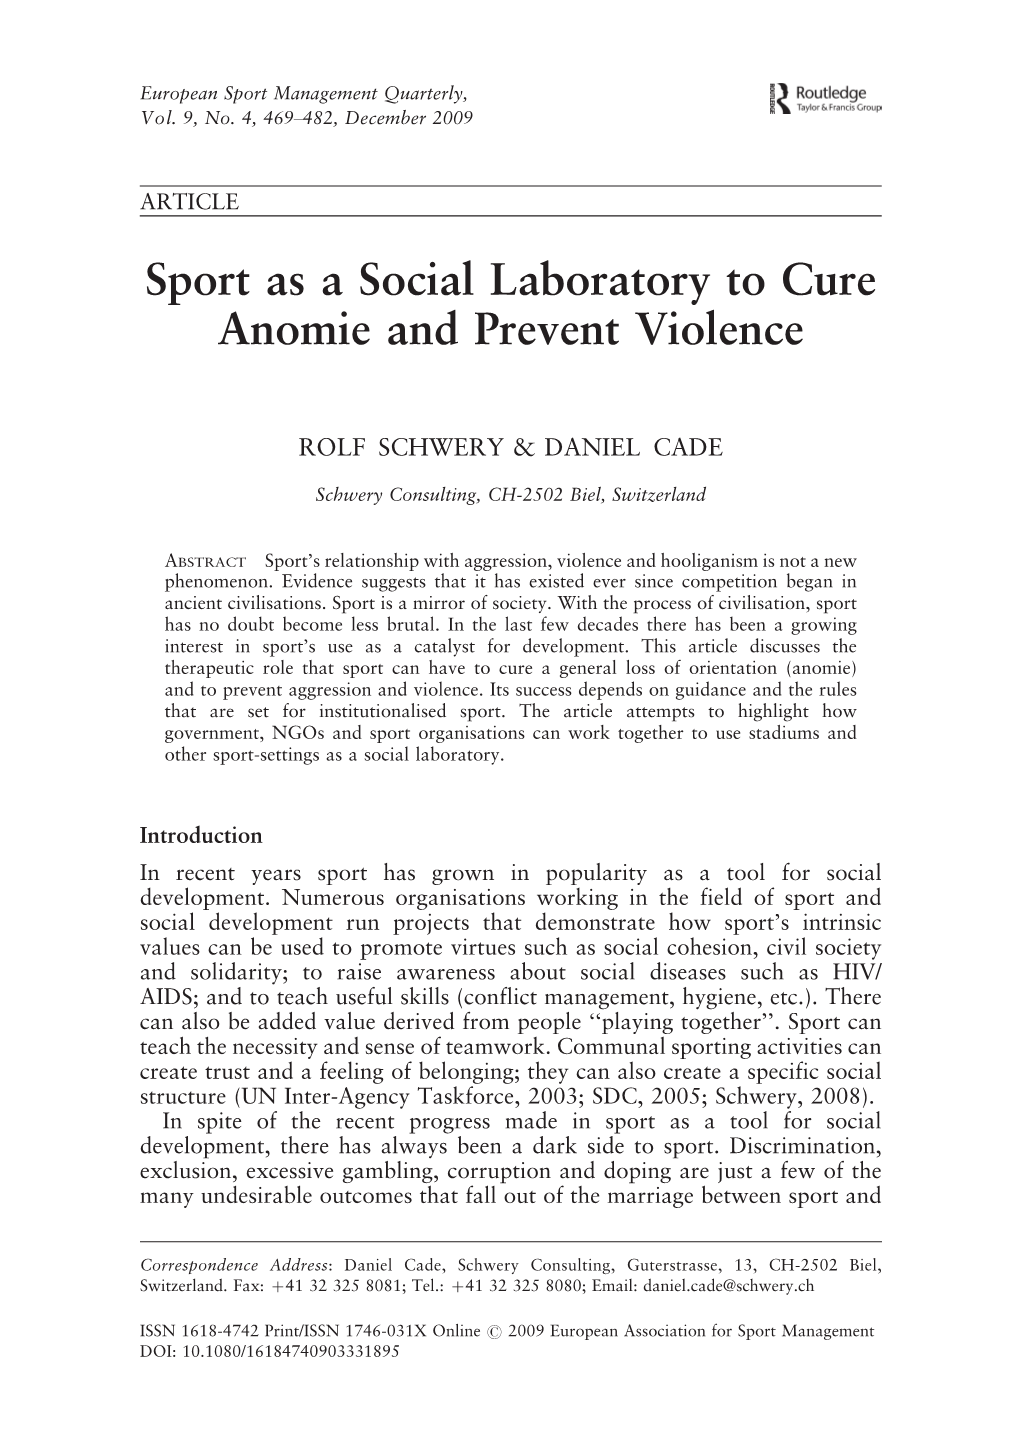 Sport As a Social Laboratory to Cure Anomie and Prevent Violence